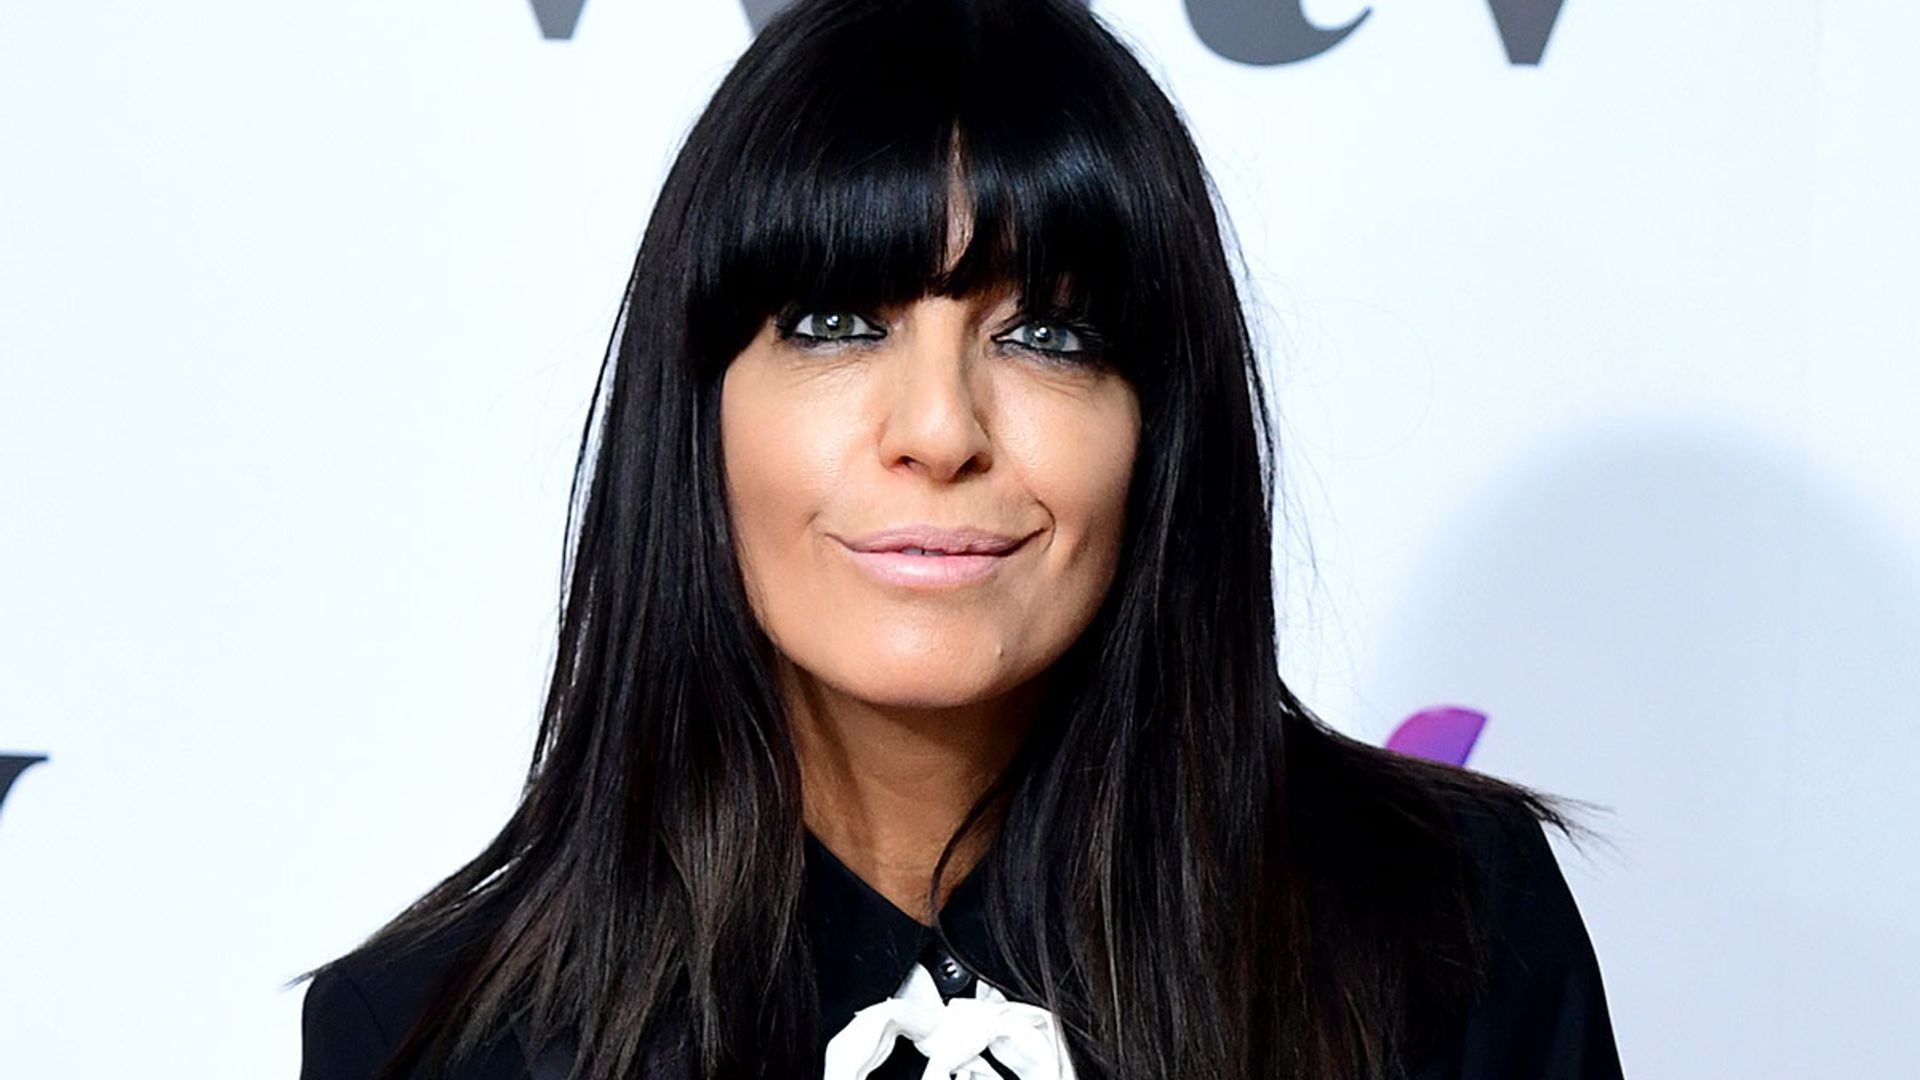 'Heartbroken' Claudia Winkleman struggling to come to terms with separation from eldest son